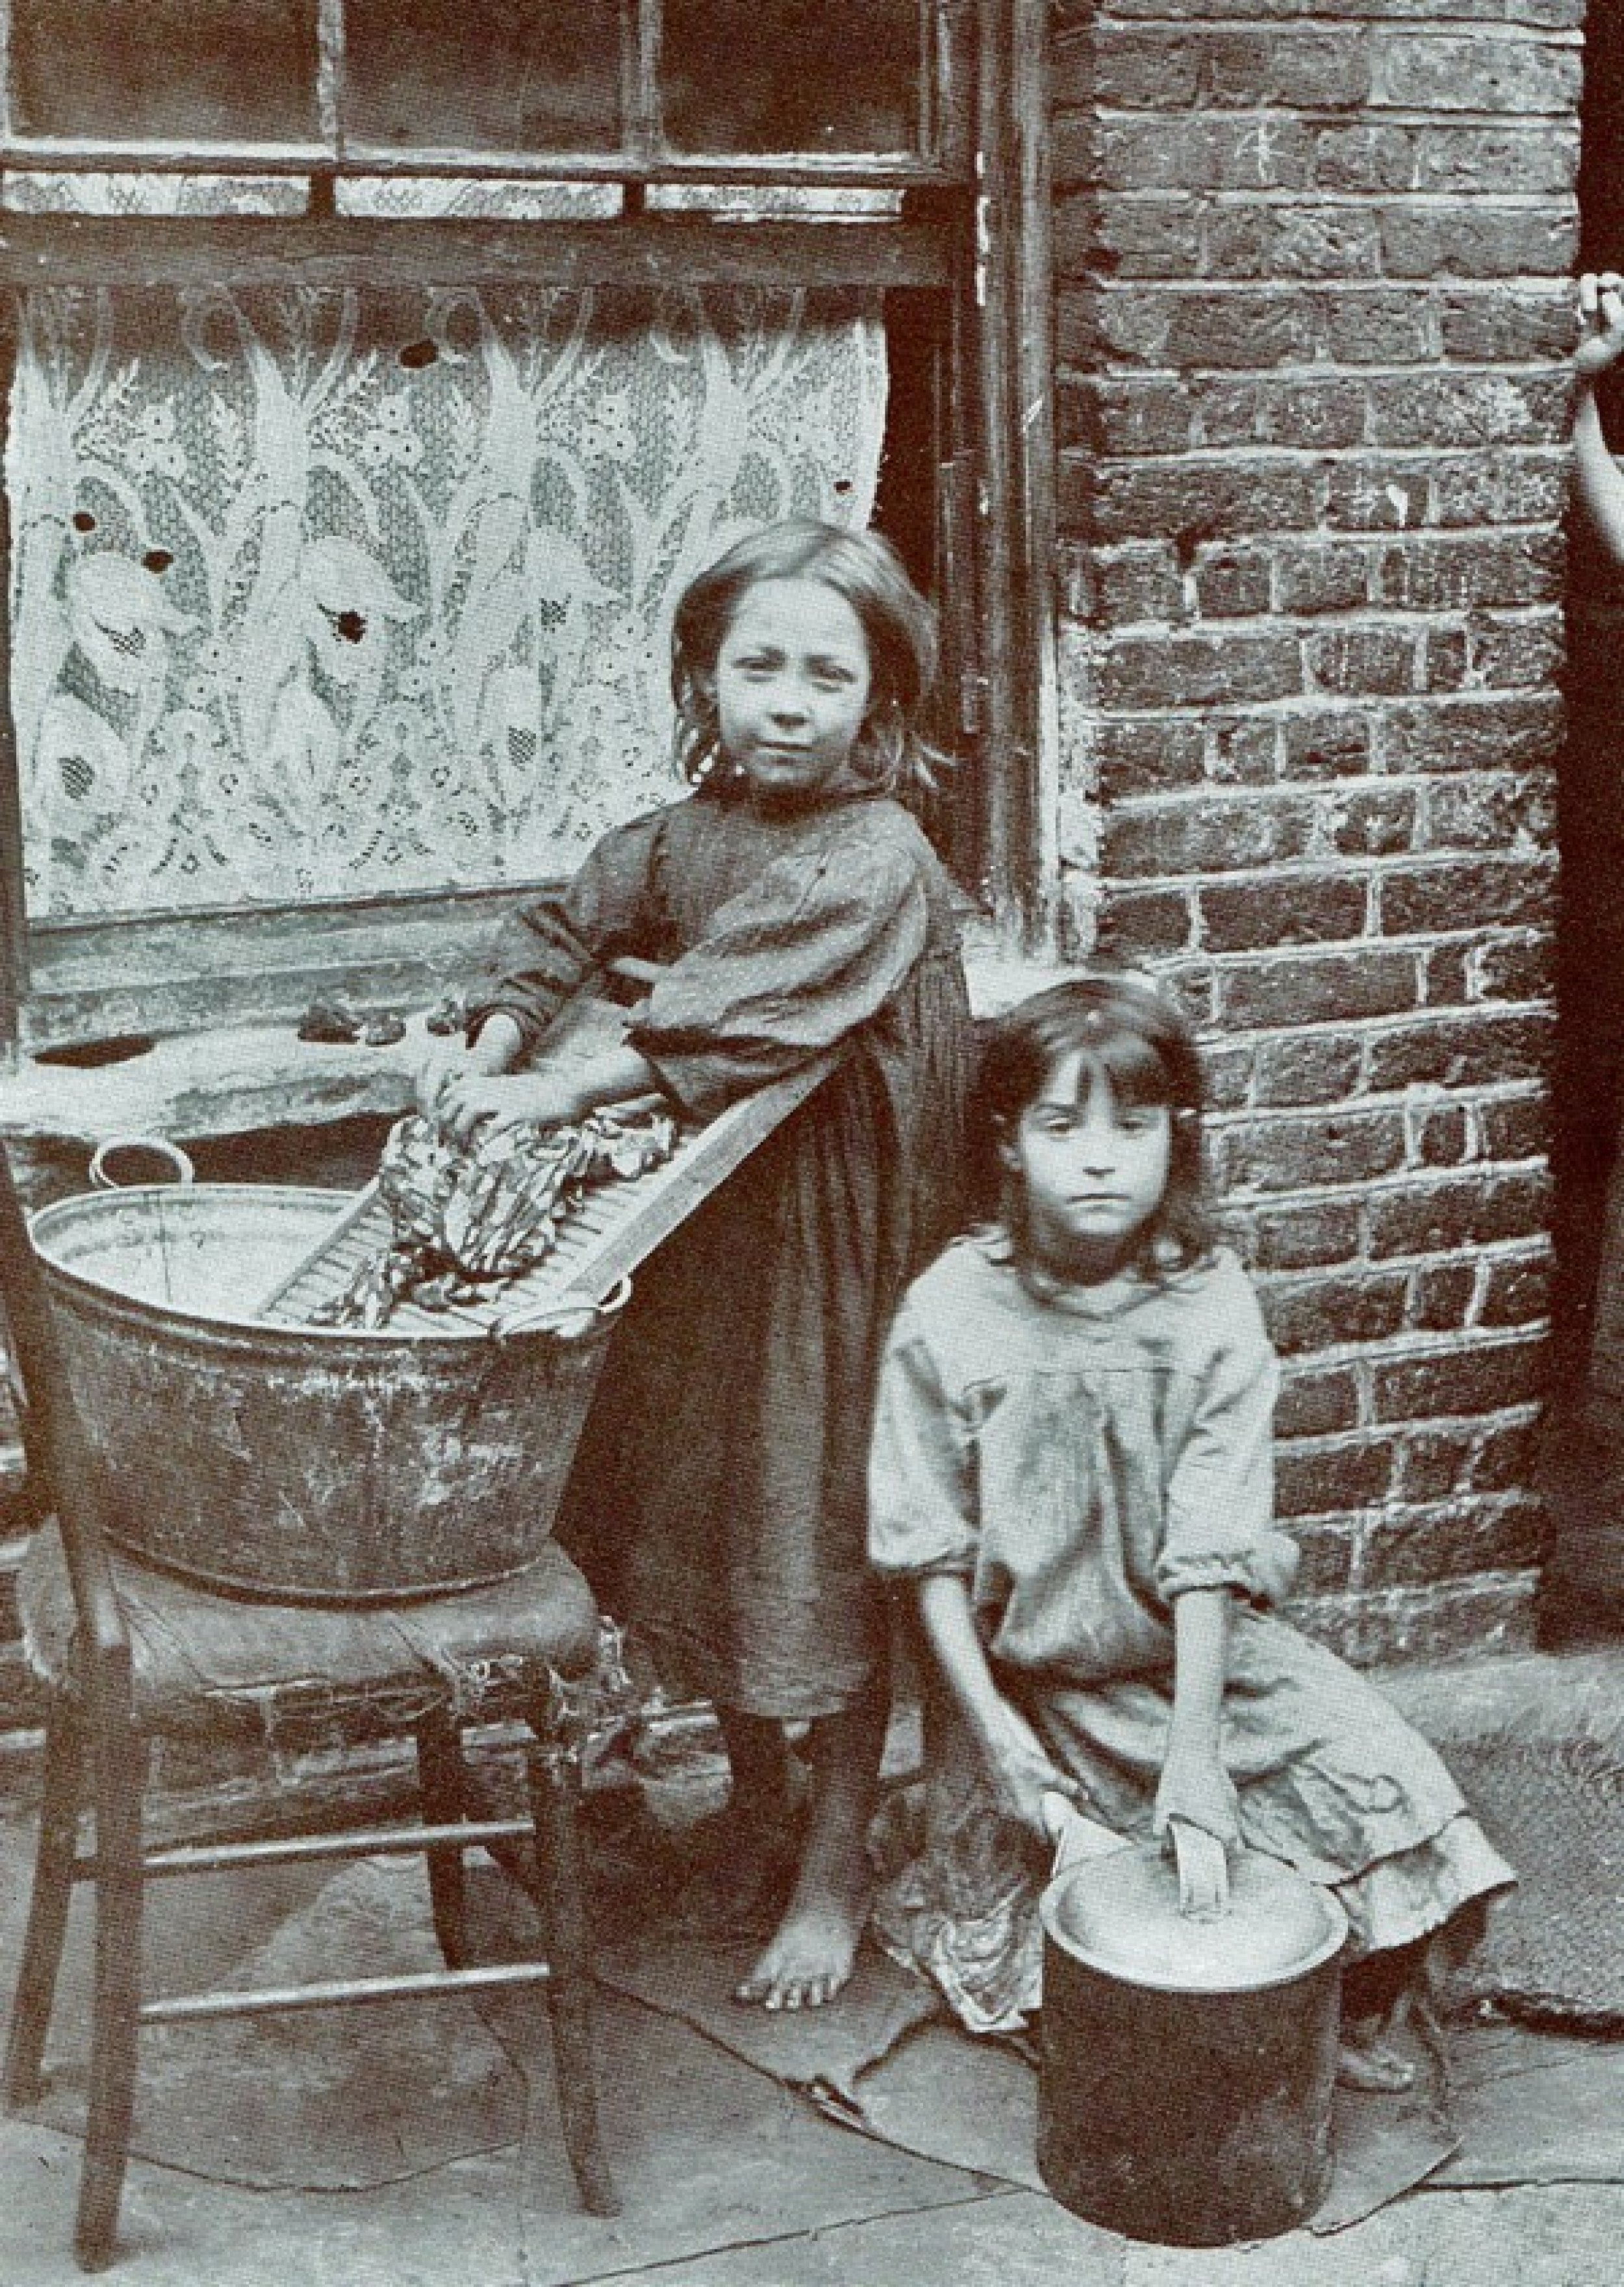 Childen of the East End of London, 1912